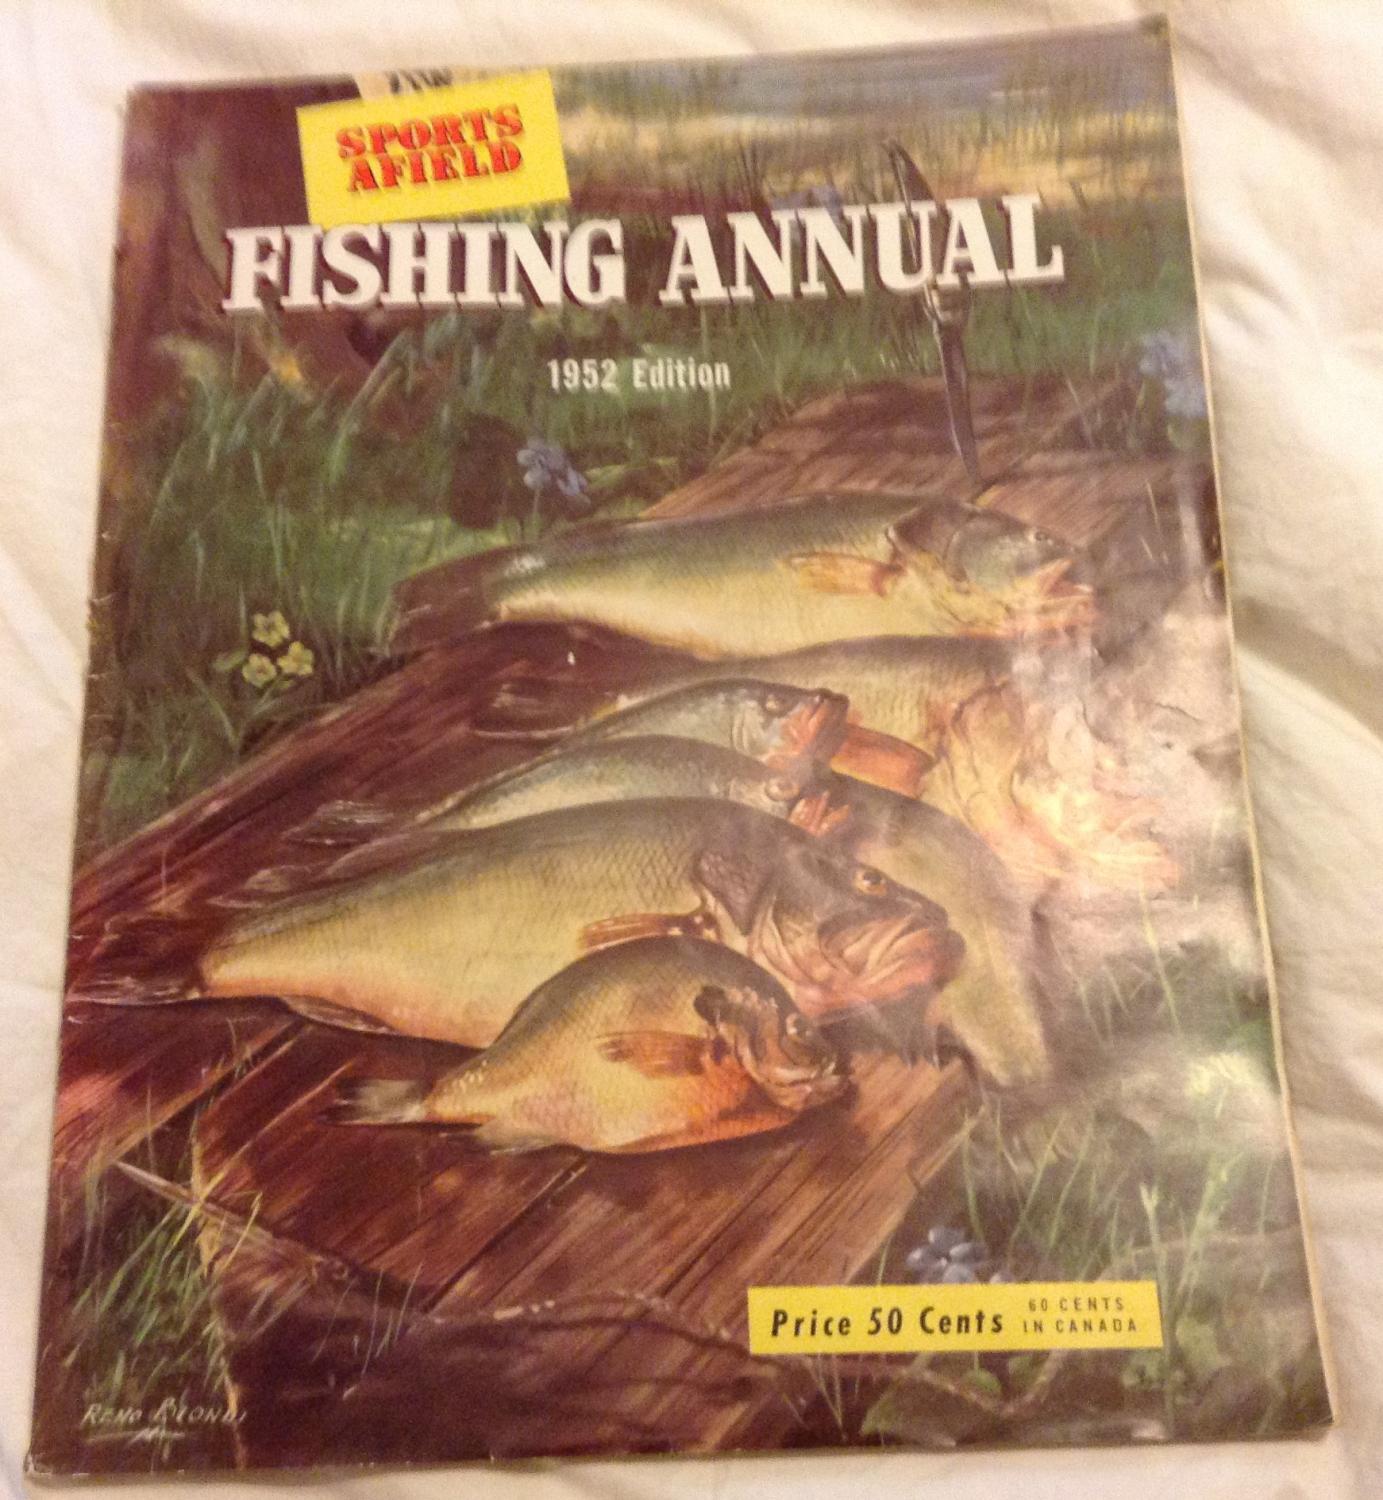 Sports Afield Fishing Annual 1952 by Ted Kesting, Editor: Fair Periodical  (1952) Edition Not Stated.